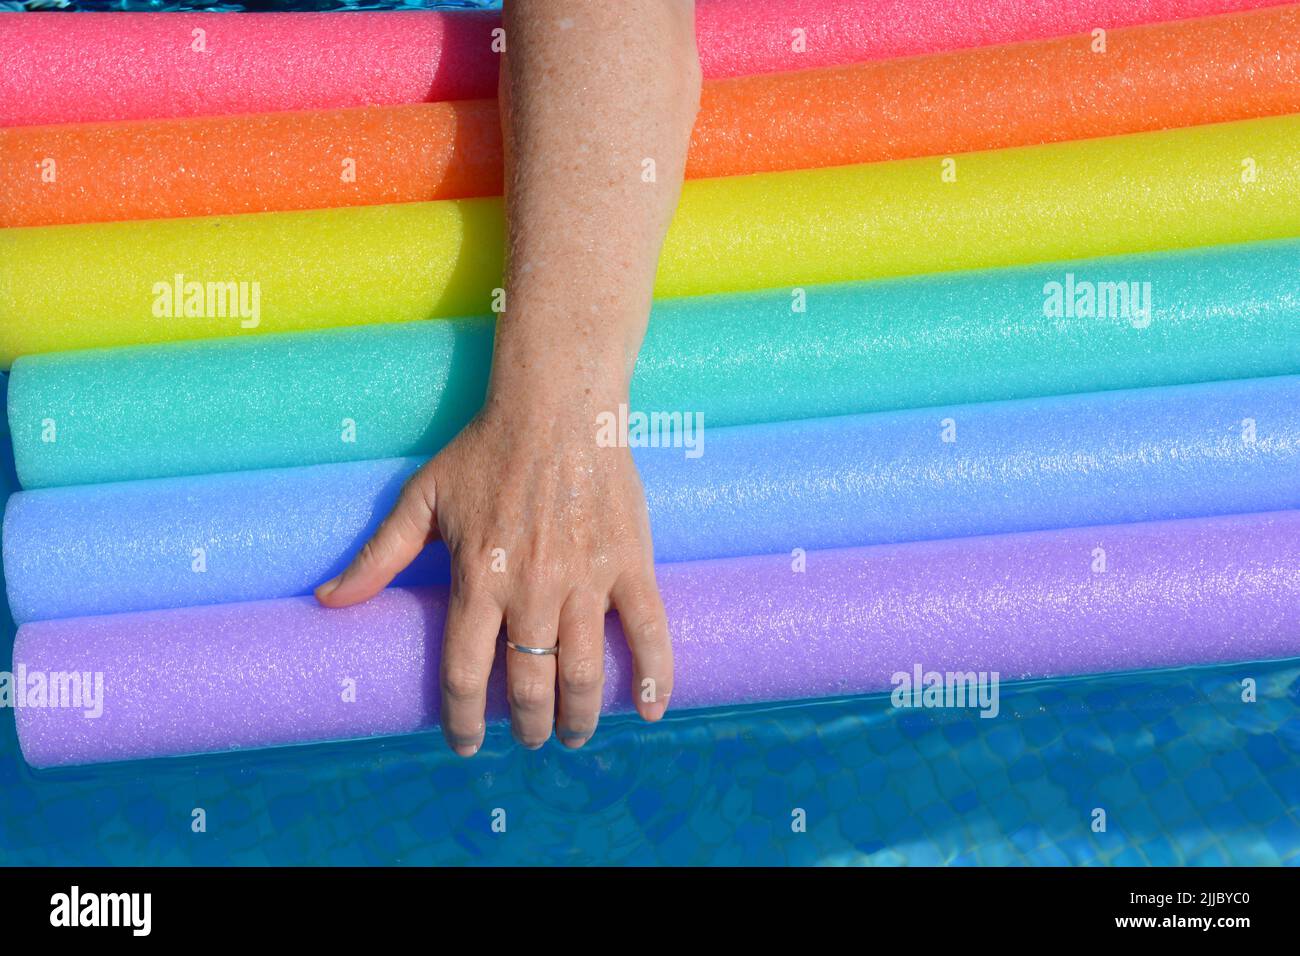 Woman's arm resting on rainbow coloured swim noodles in swimming pool Stock Photo